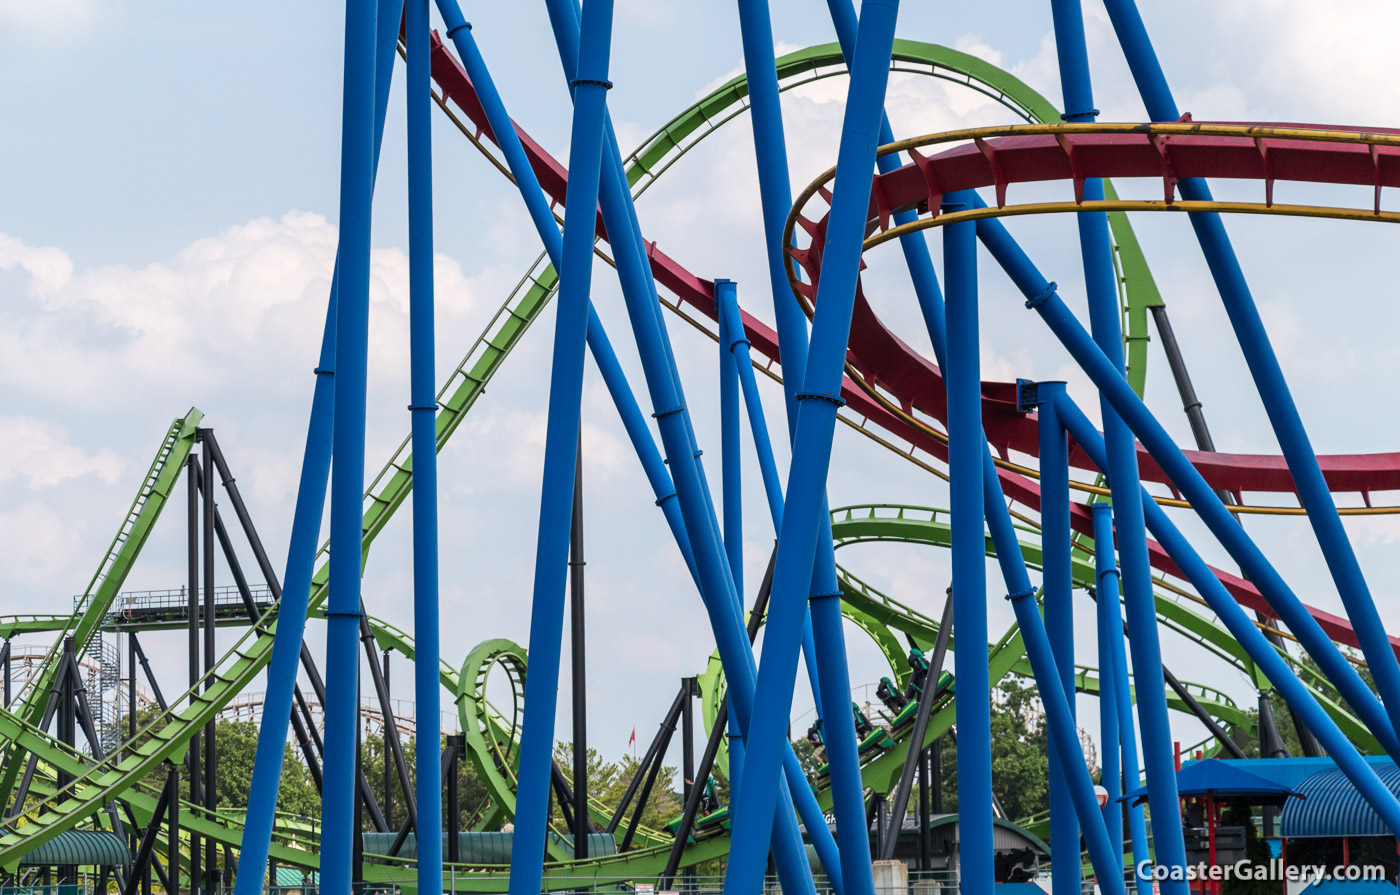 Four of the five loops on the Green Lantern stand-up roller coaster at Six Flags Great Adventure in New Jersey